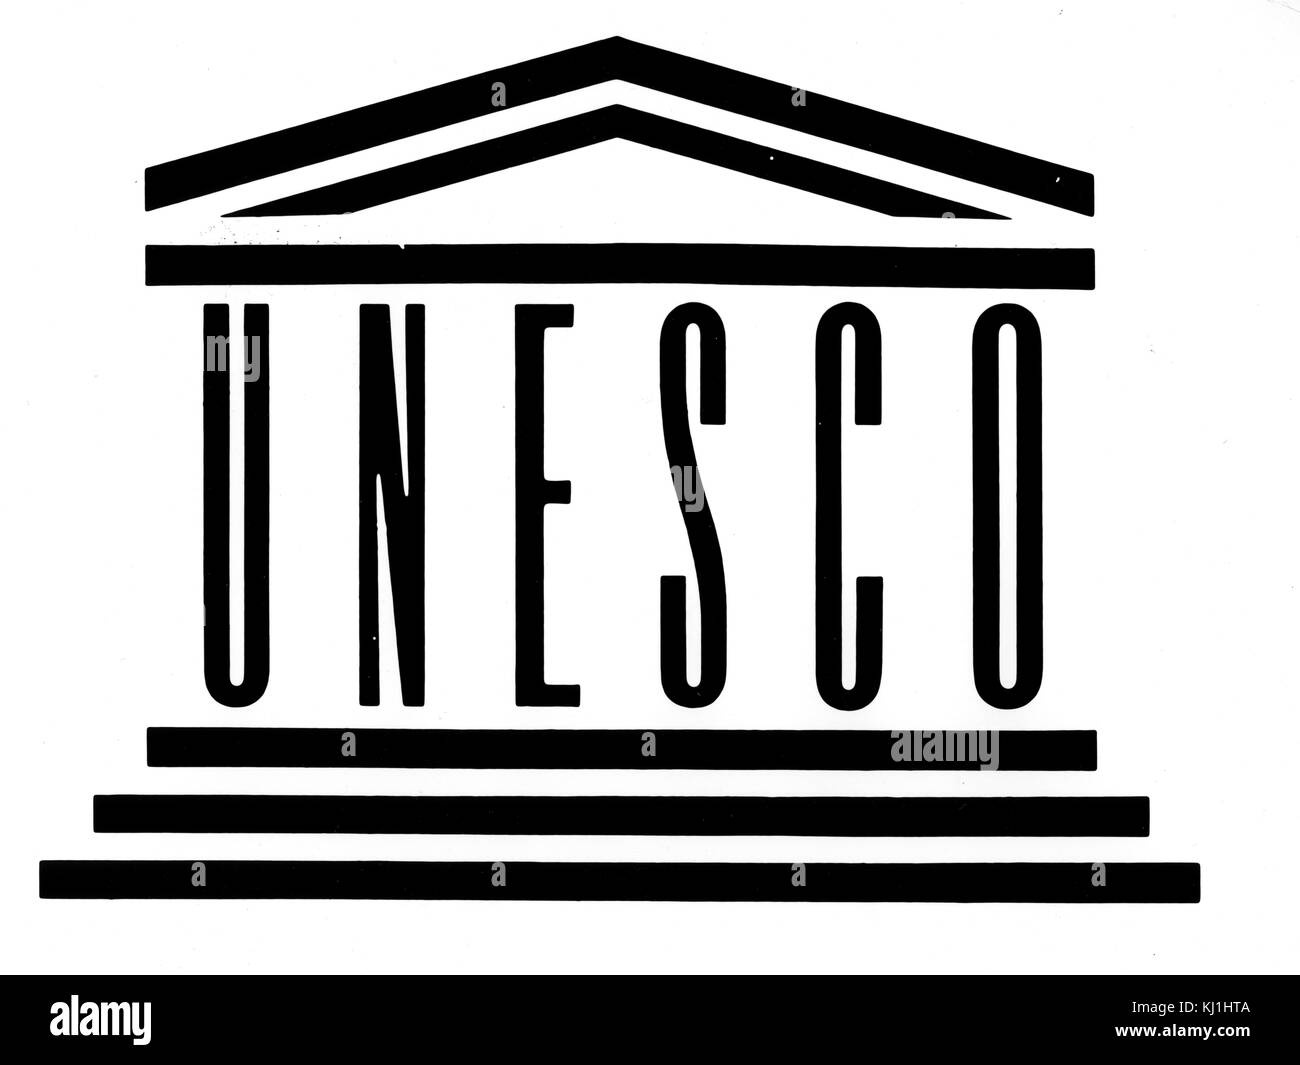 Official logo for UNESCO (the United Nations Educational ...